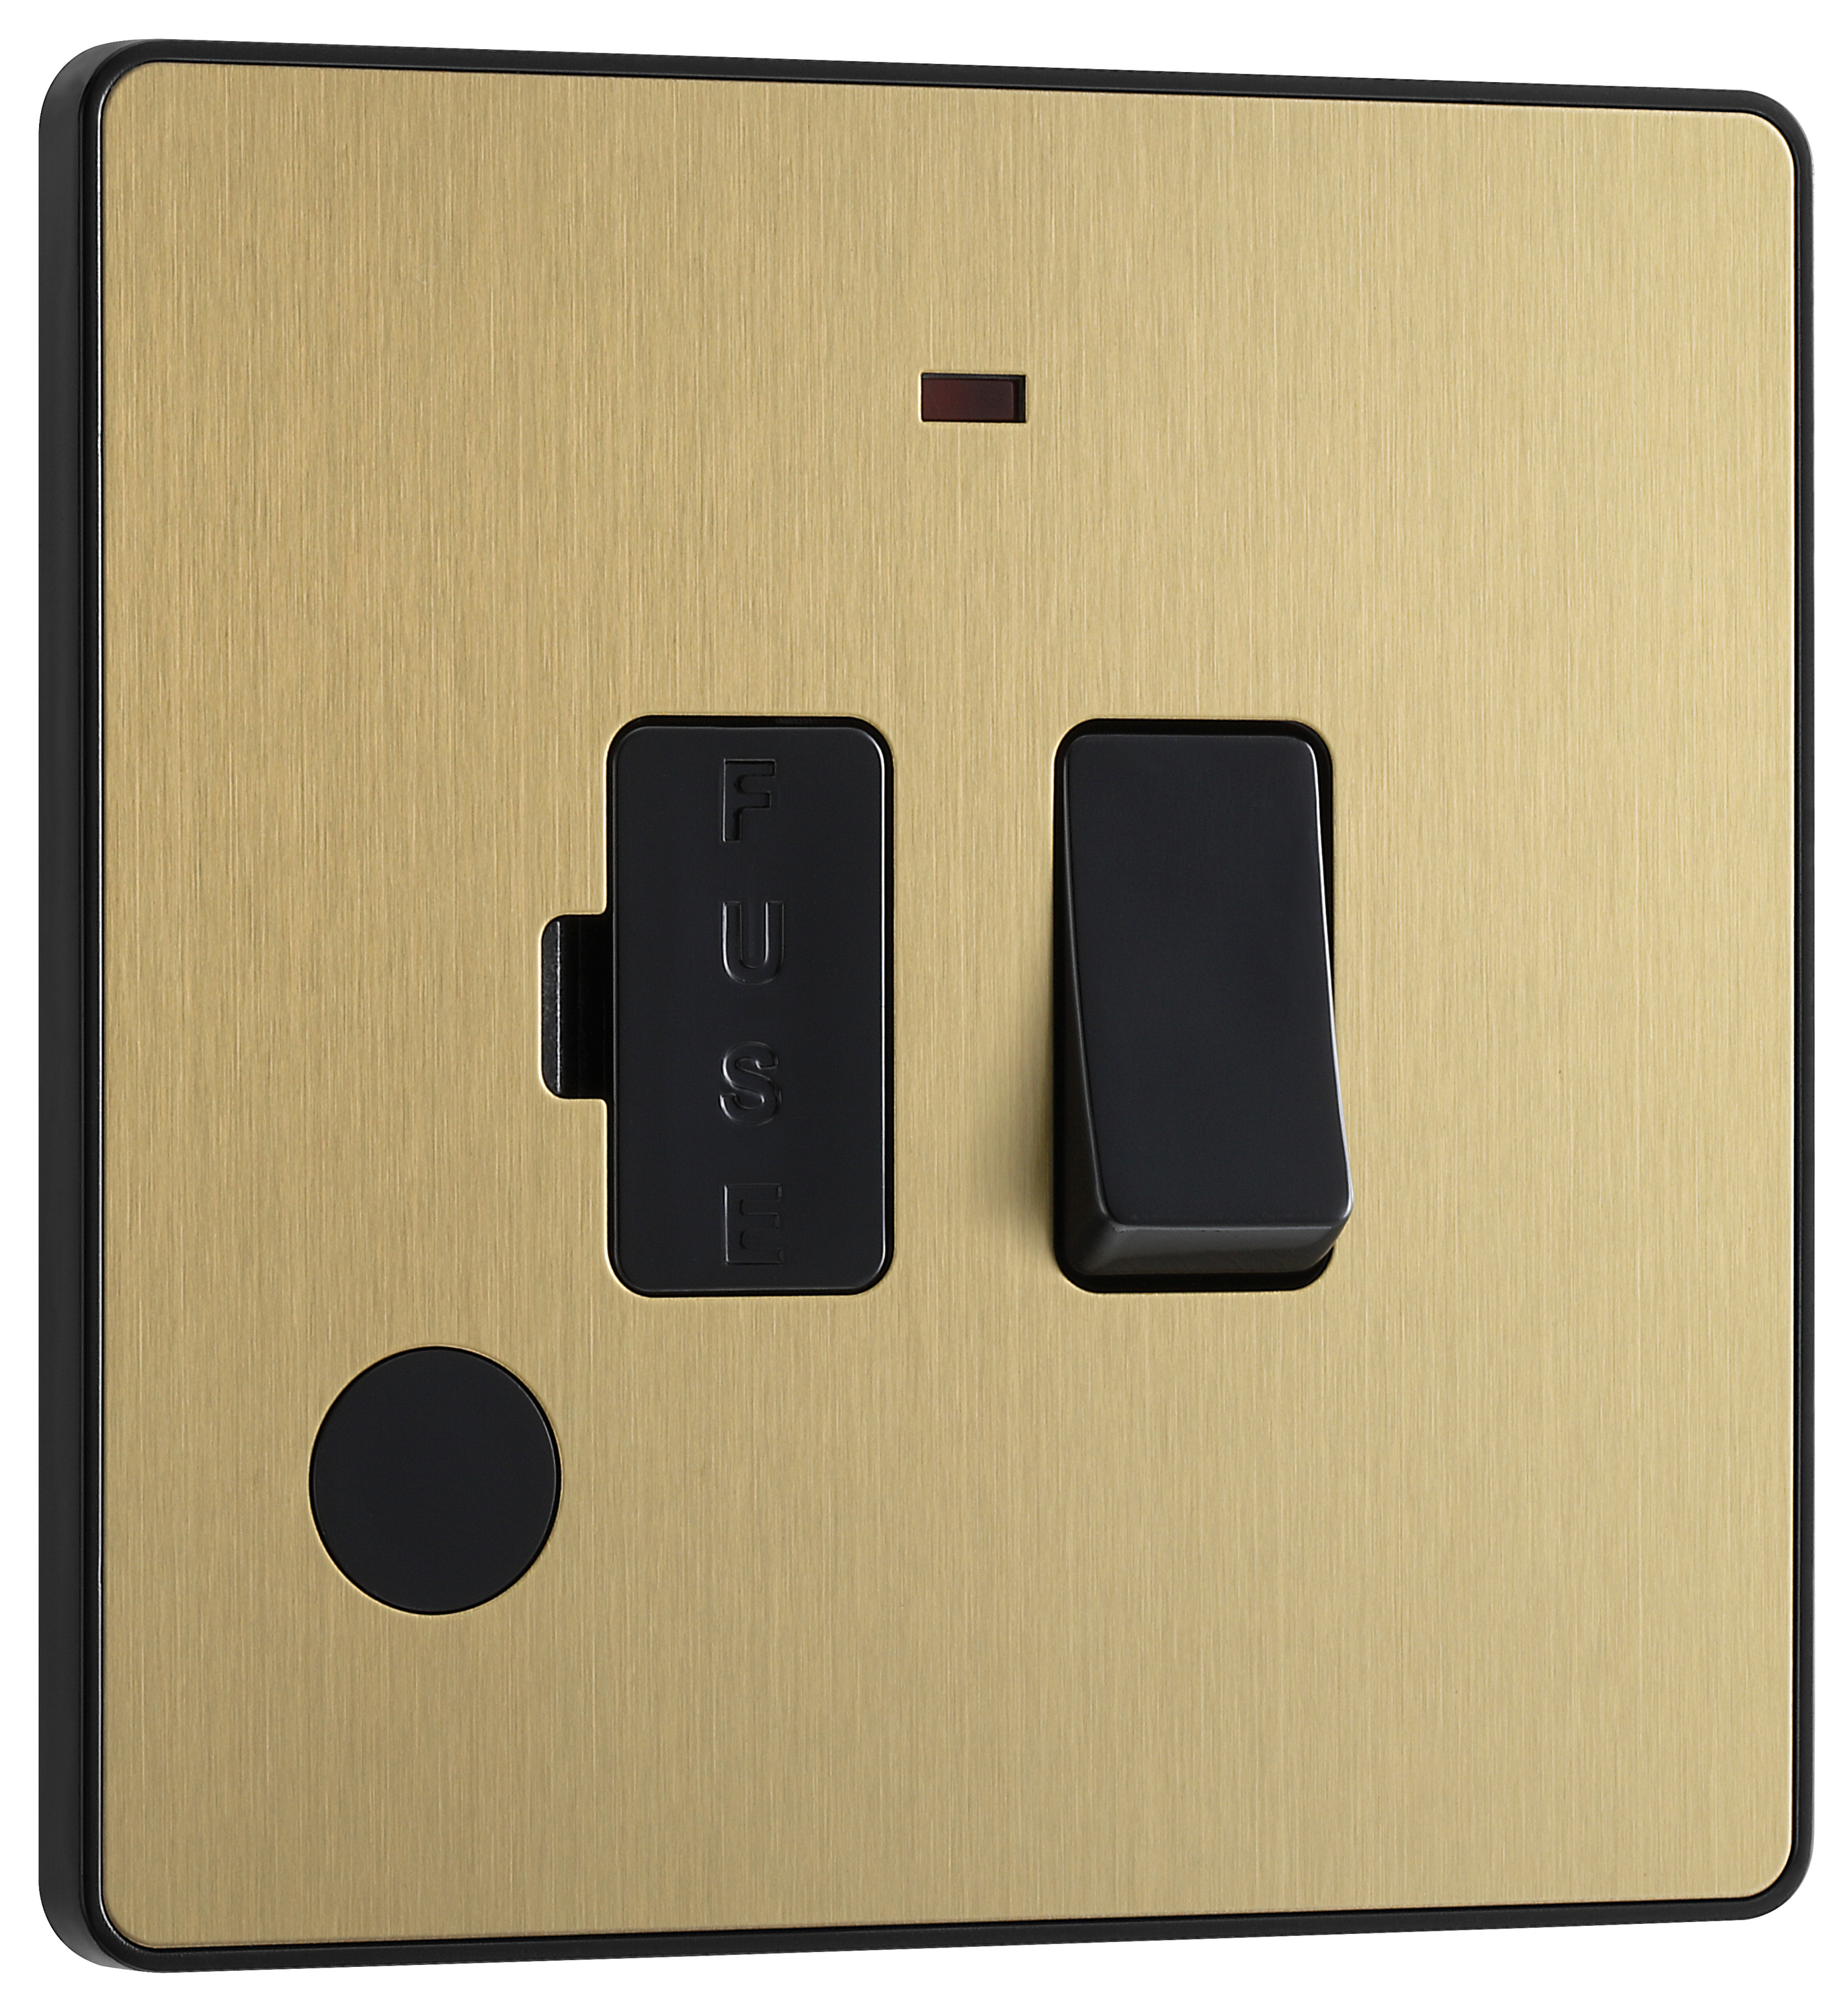 BG Evolve Brushed Brass 13A Switched Fused Connection Unit with Power Led Indicator & Flex Outlet